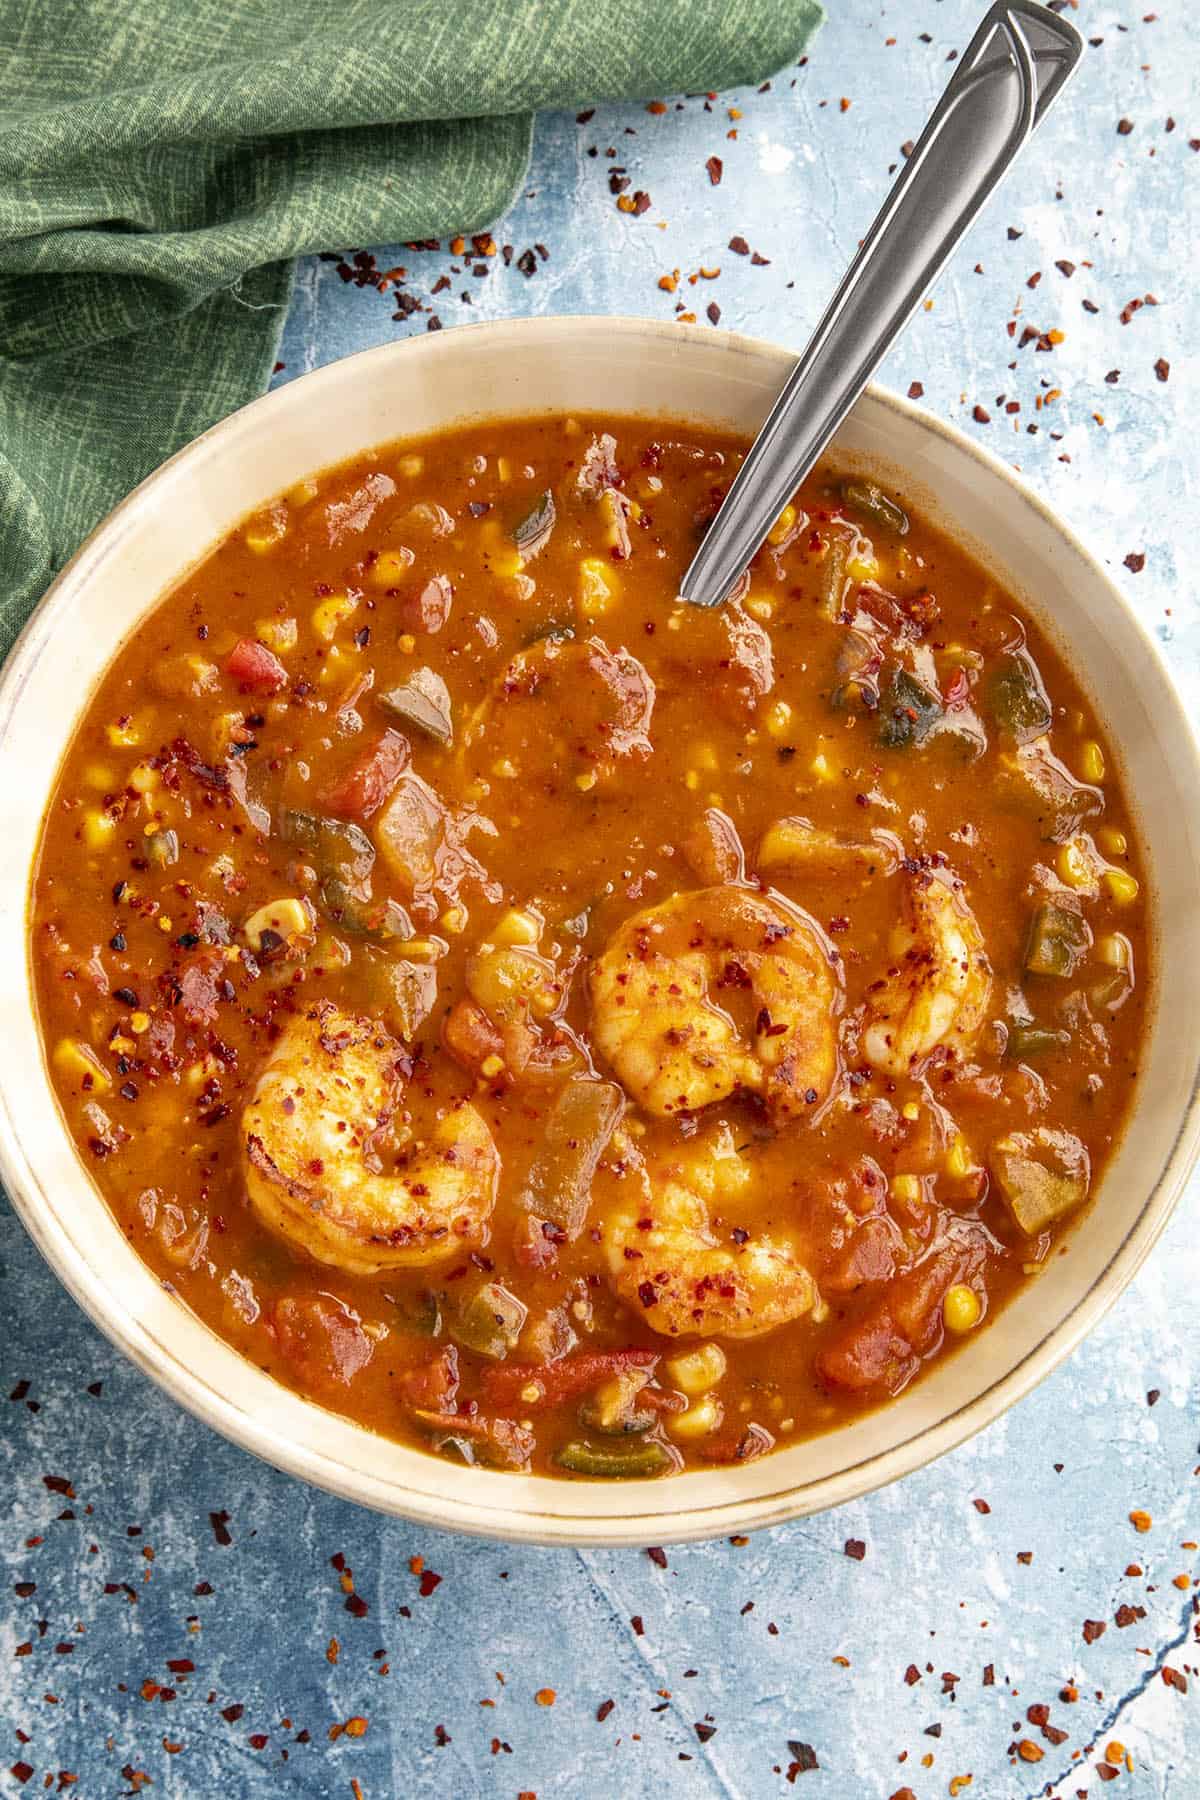 Creole Tomato and Shrimp Stew in a bowl, ready to serve